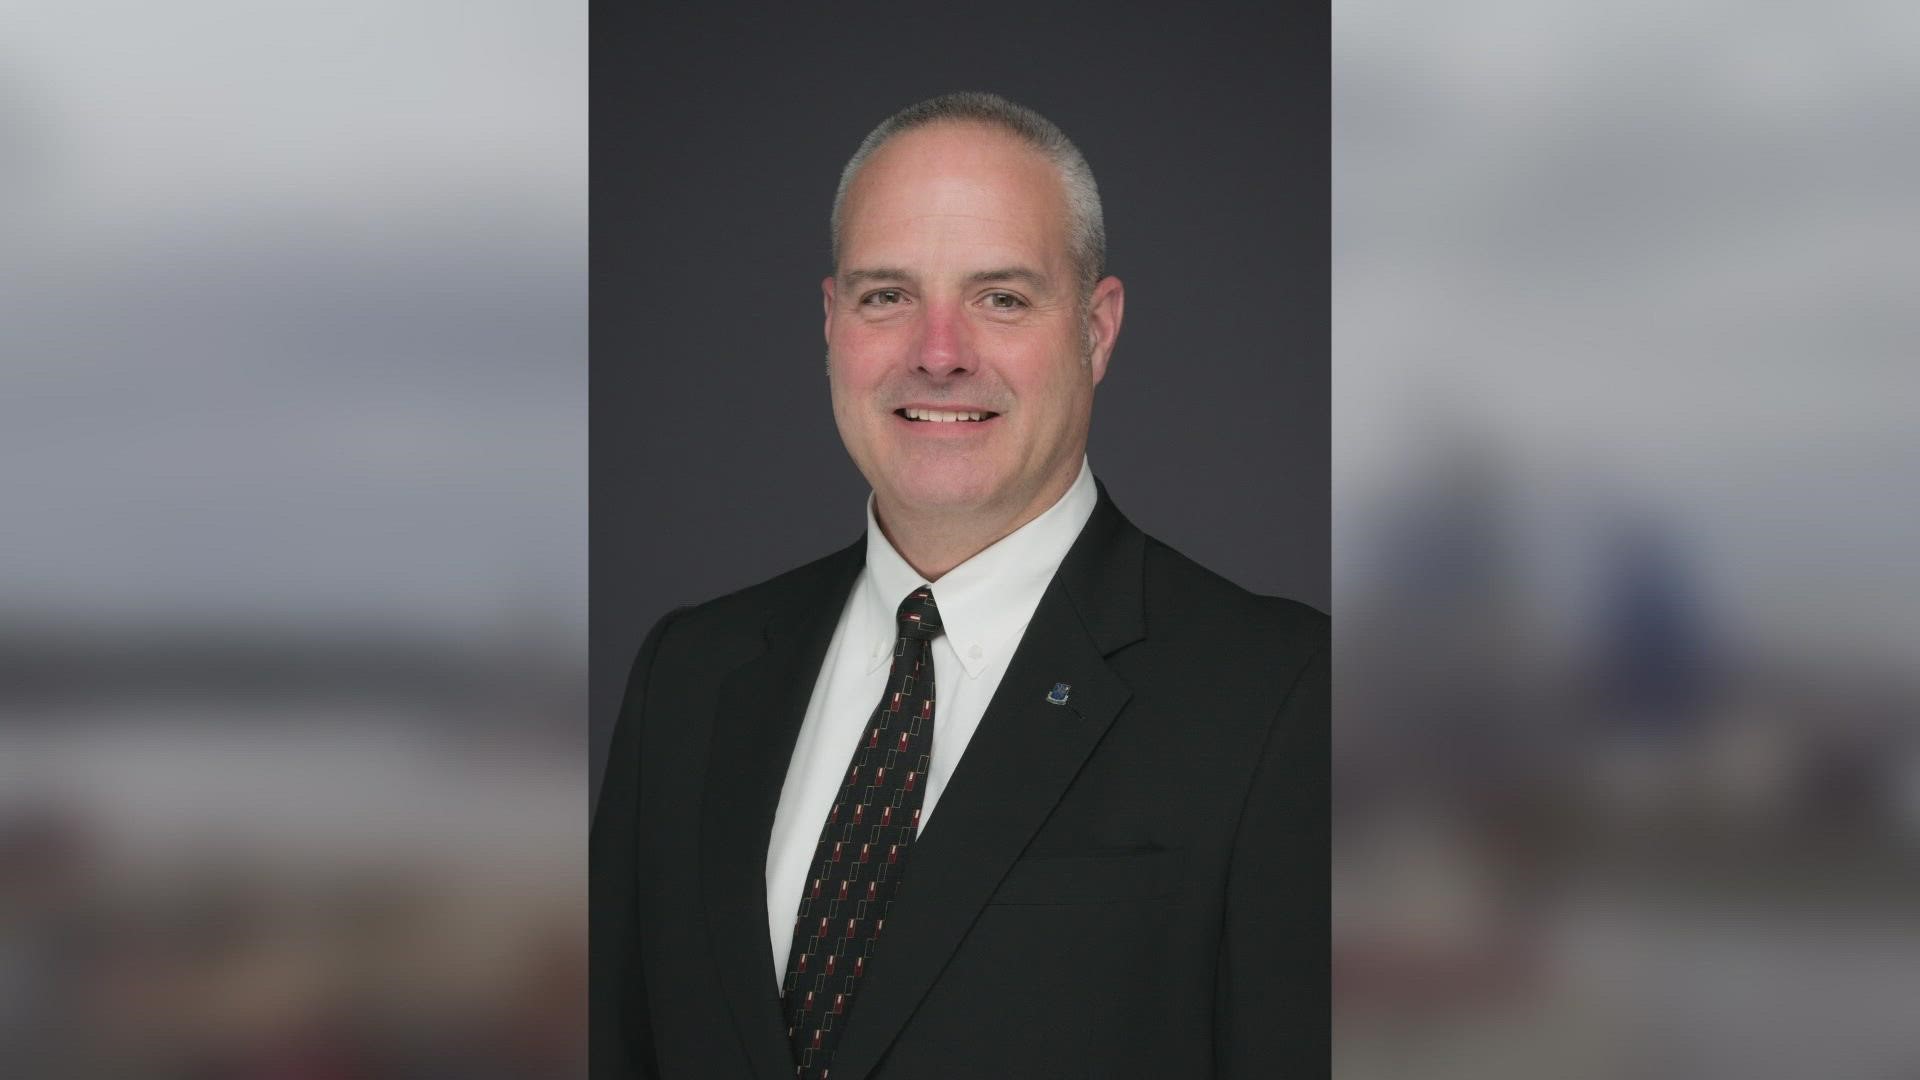 General Dynamics announced Thursday that Charles F. Krugh has been named the next president of Bath Iron Works.